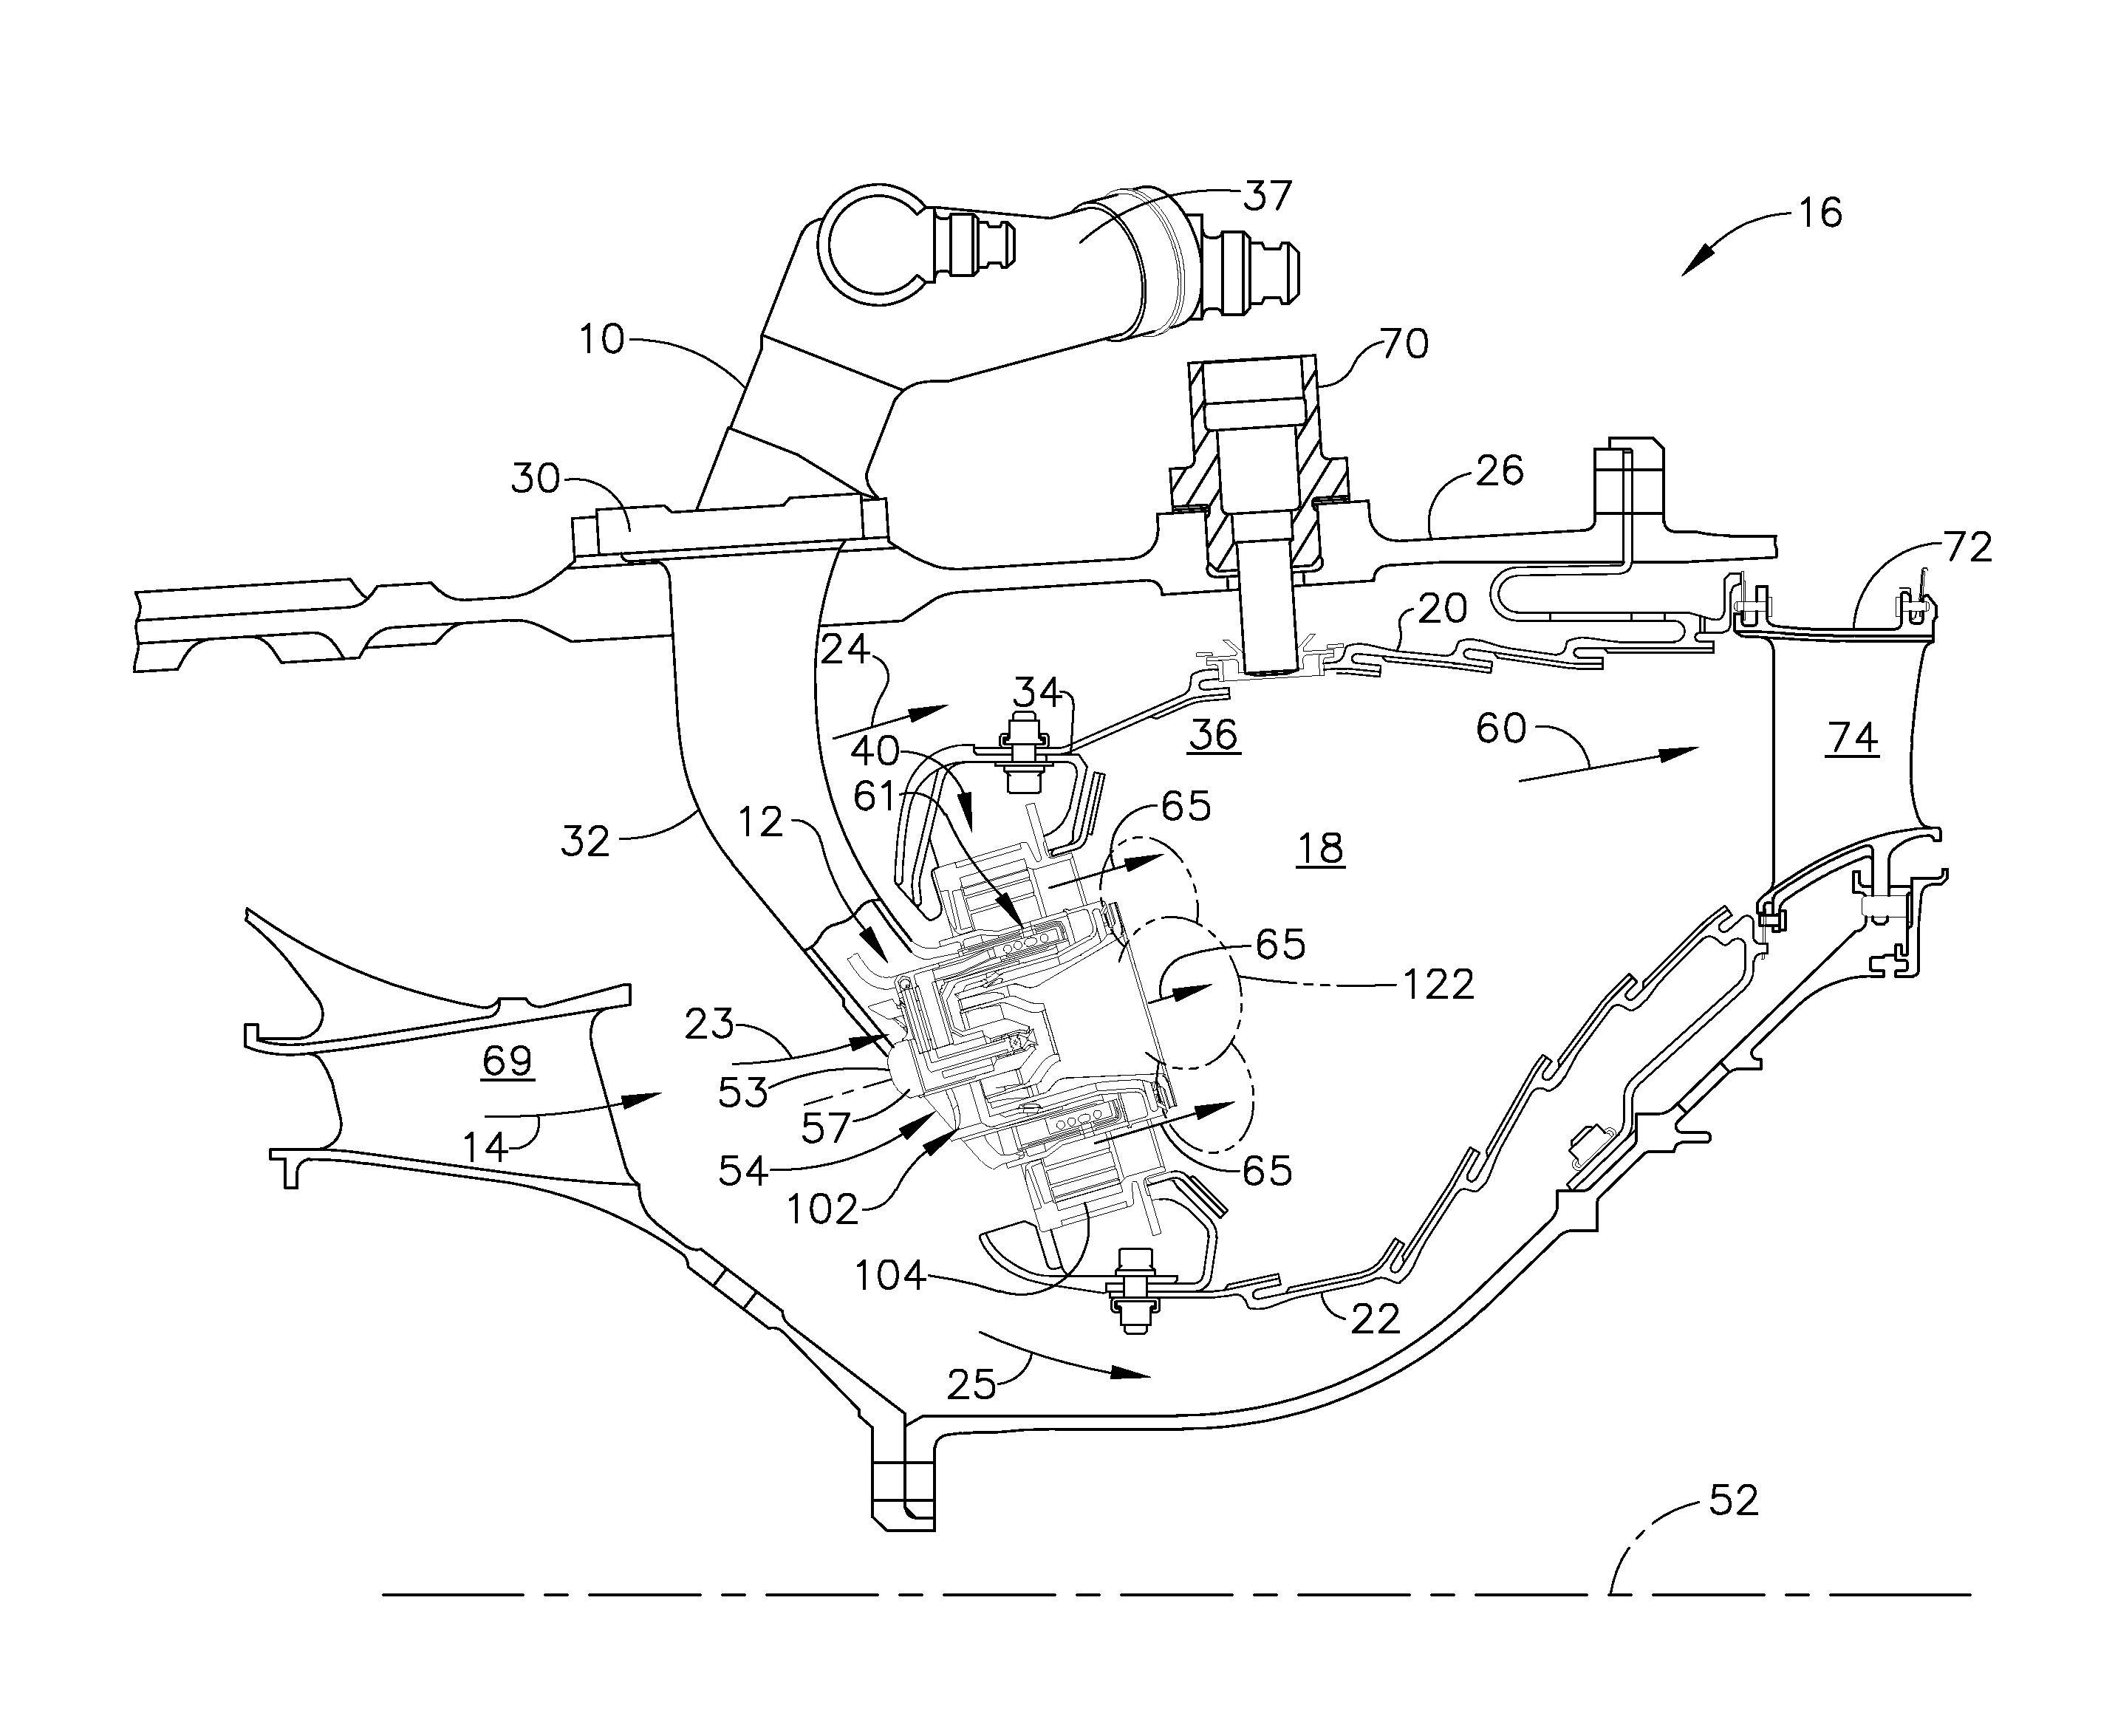 Cooling flowpath dirt deflector in fuel nozzle